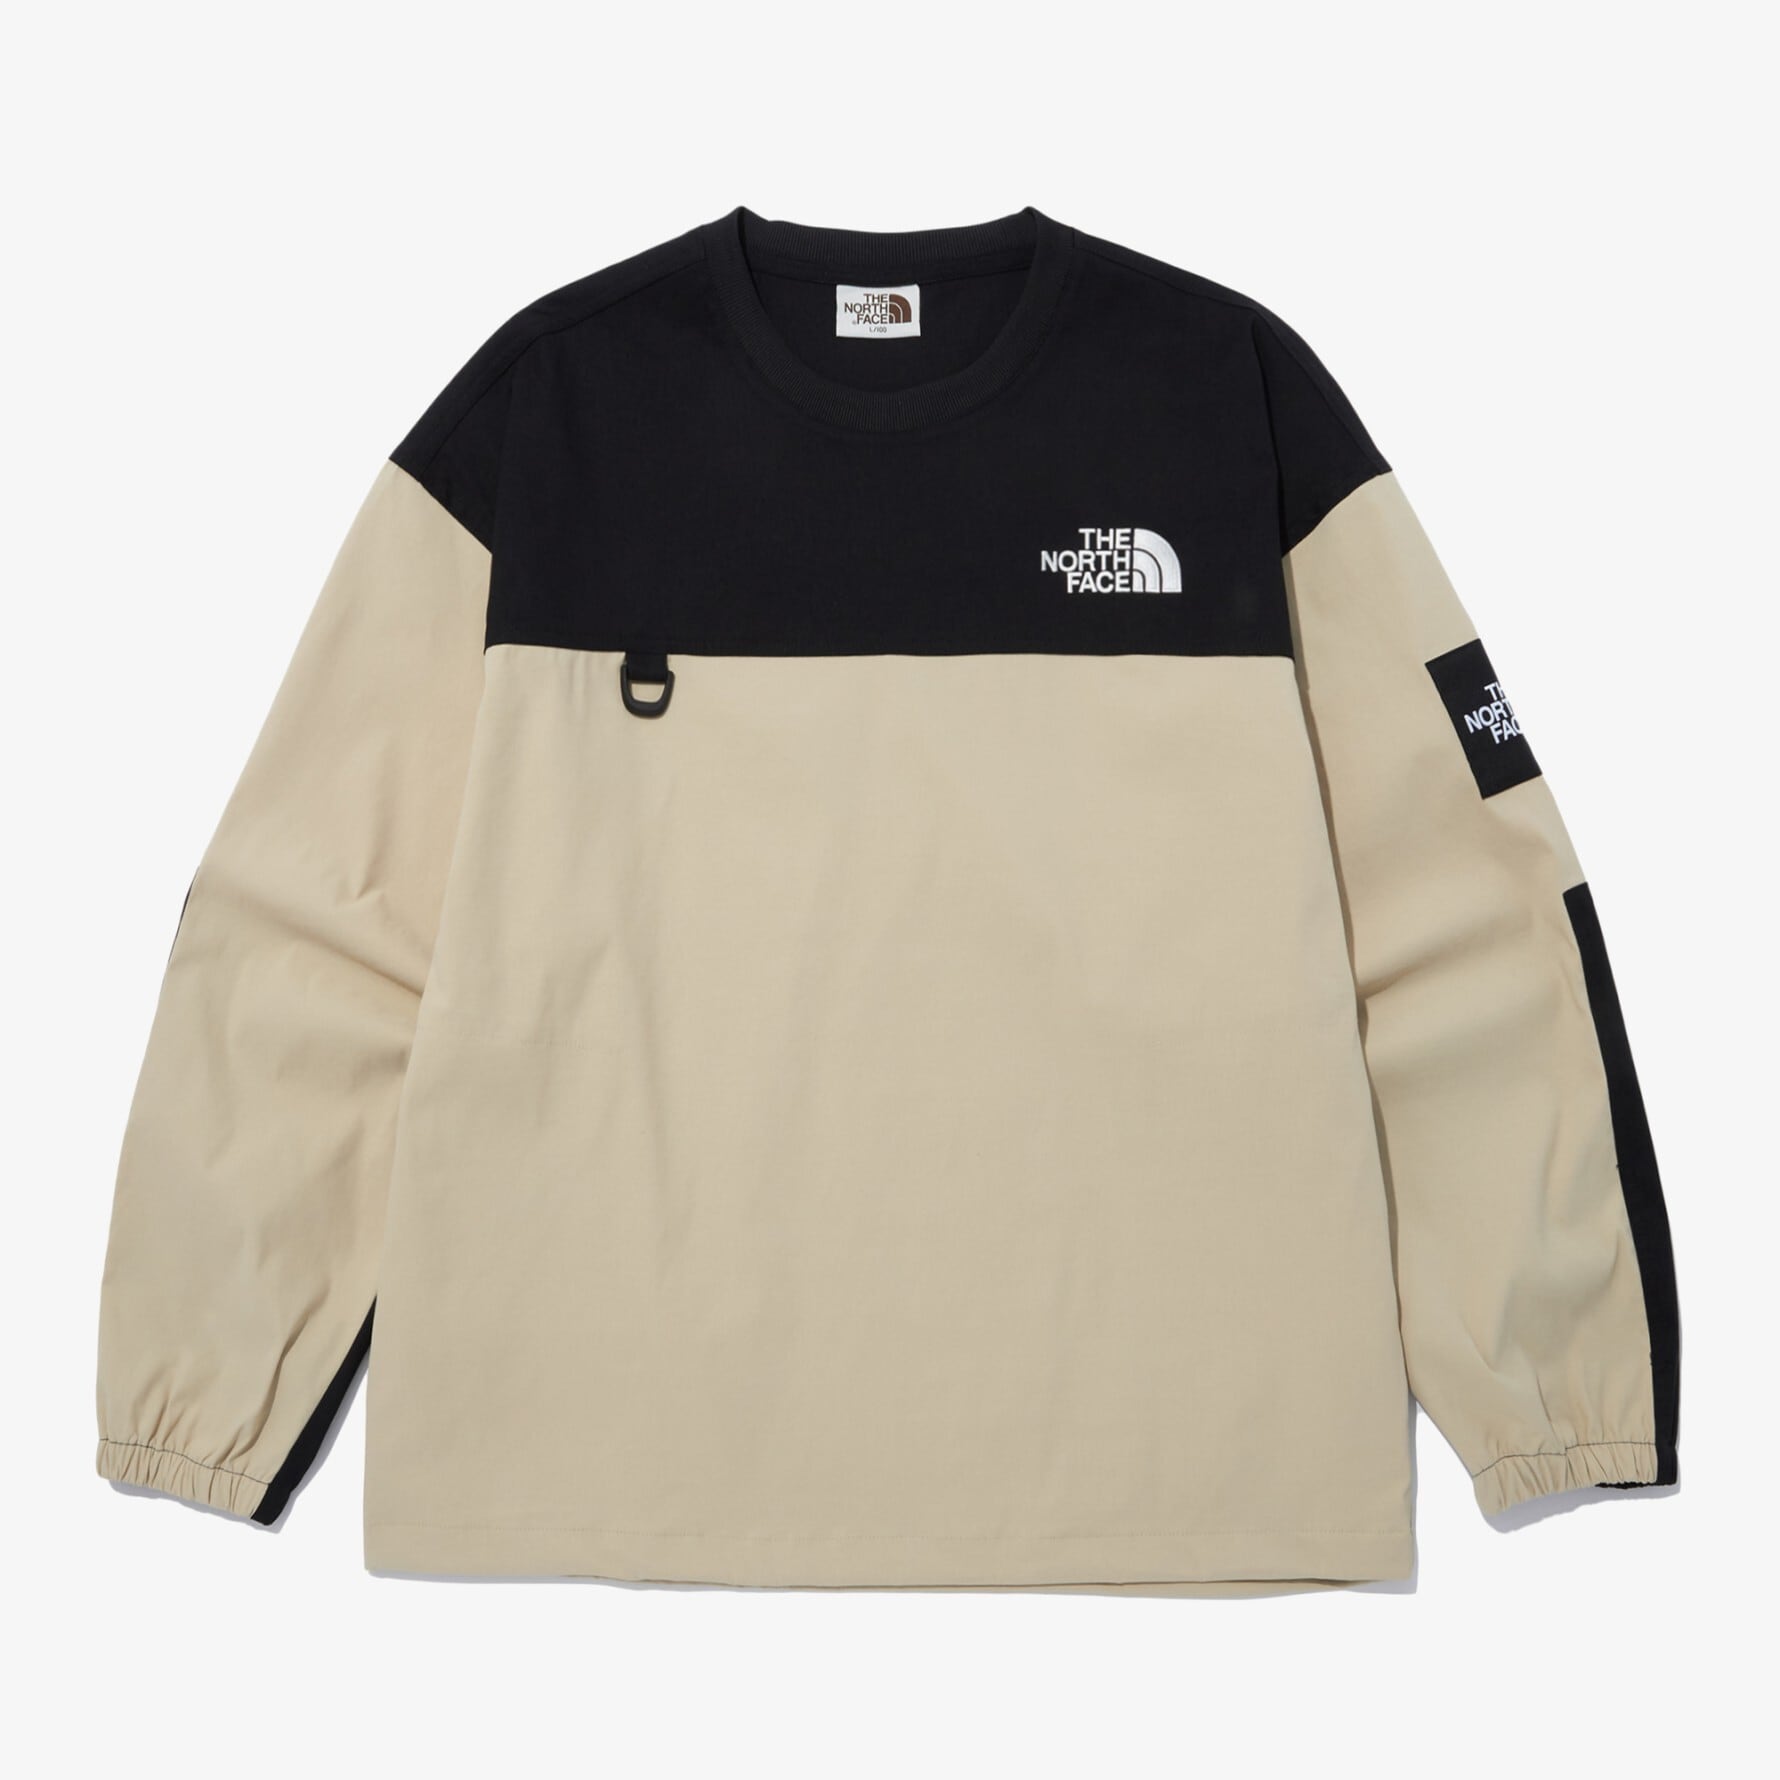 THE NORTH FACE ALBANY CREWNECK Ｓ - その他